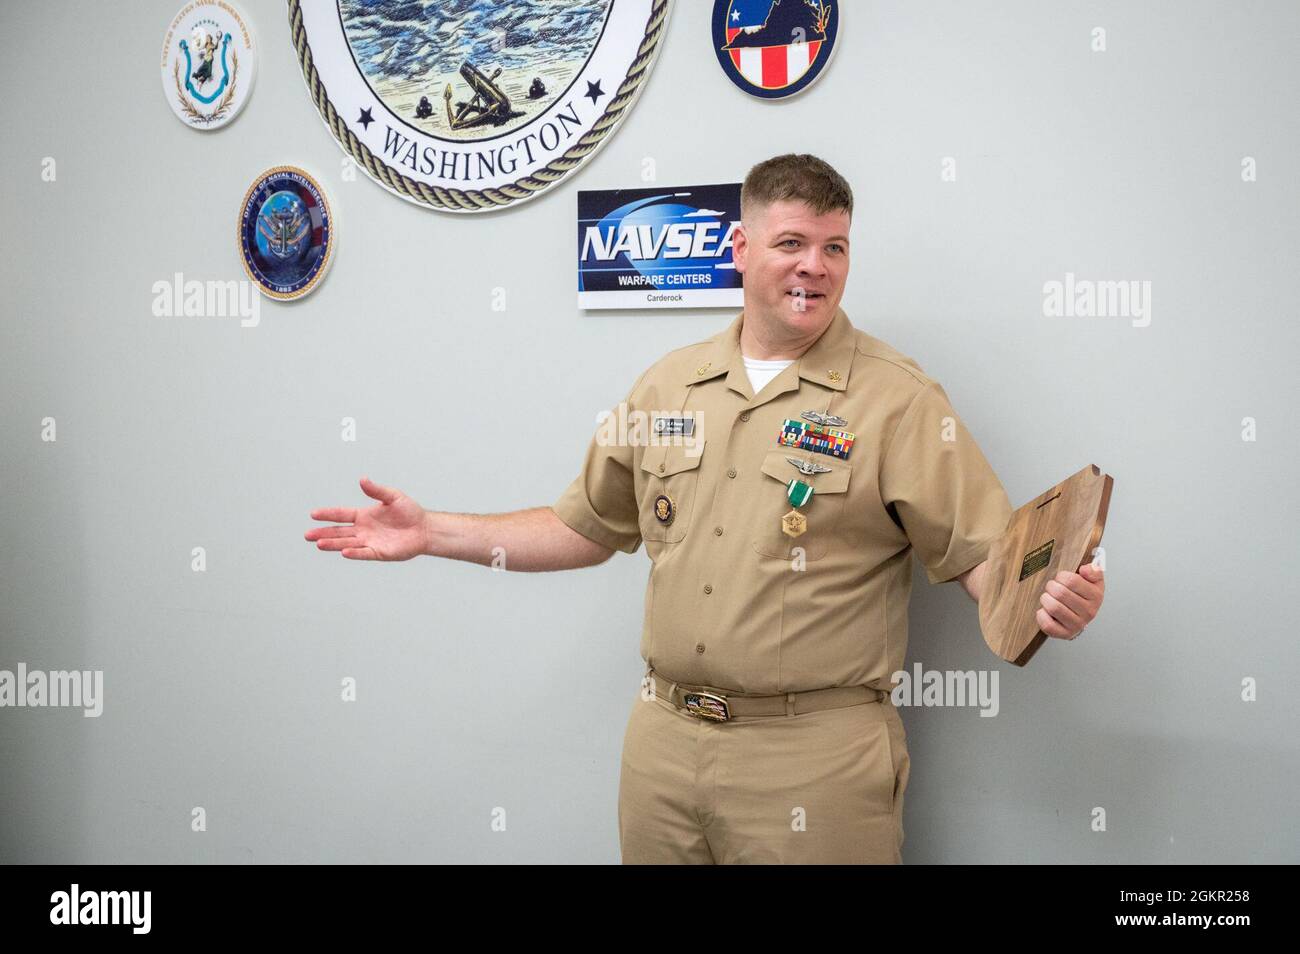 WASHINGTON, DC (June 16, 2021) – Senior Chief Culinary Specialist Korhy Flanary addresses his colleagues and friends during his end-of-tour award ceremony, held onboard Washington Navy Yard. Stock Photo